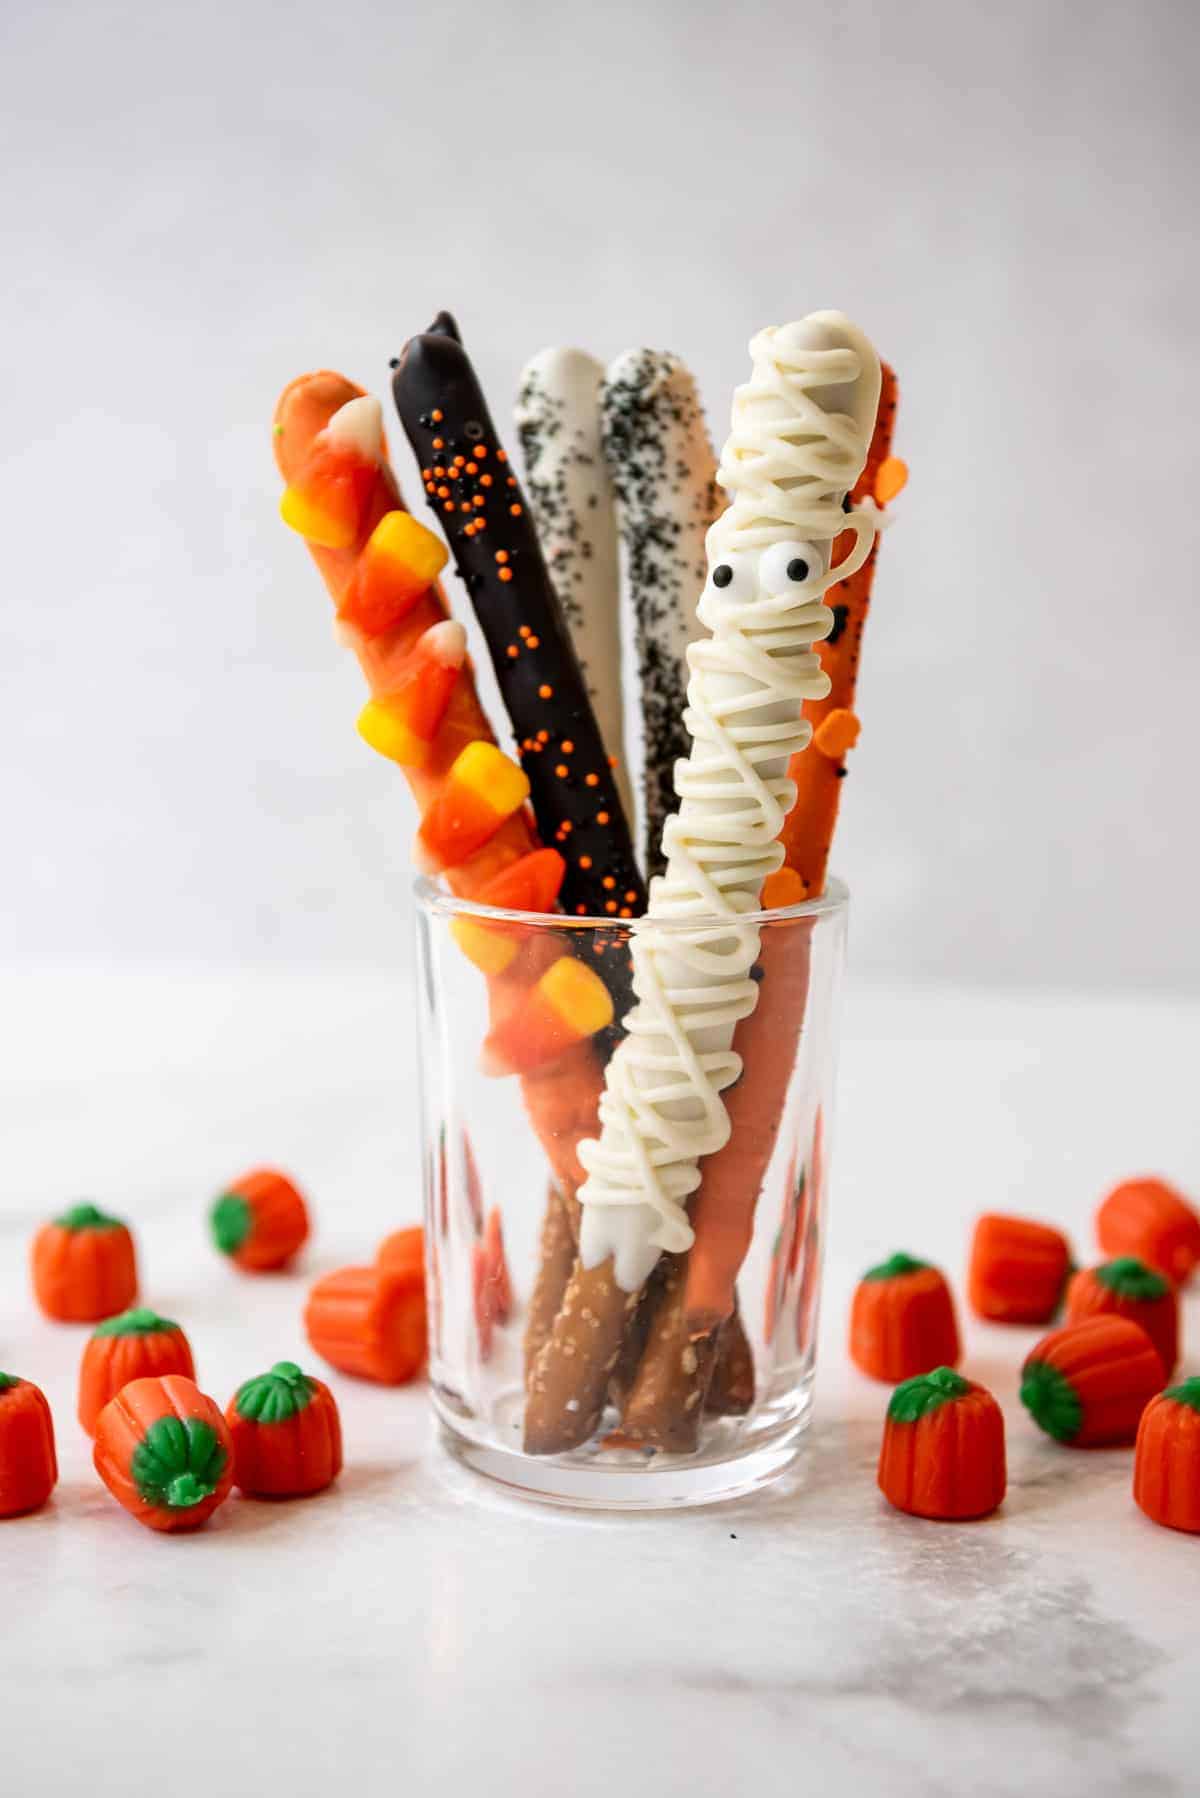 Chocolate covered Halloween pretzel rods displayed in a glass with candy pumpkins next to them.